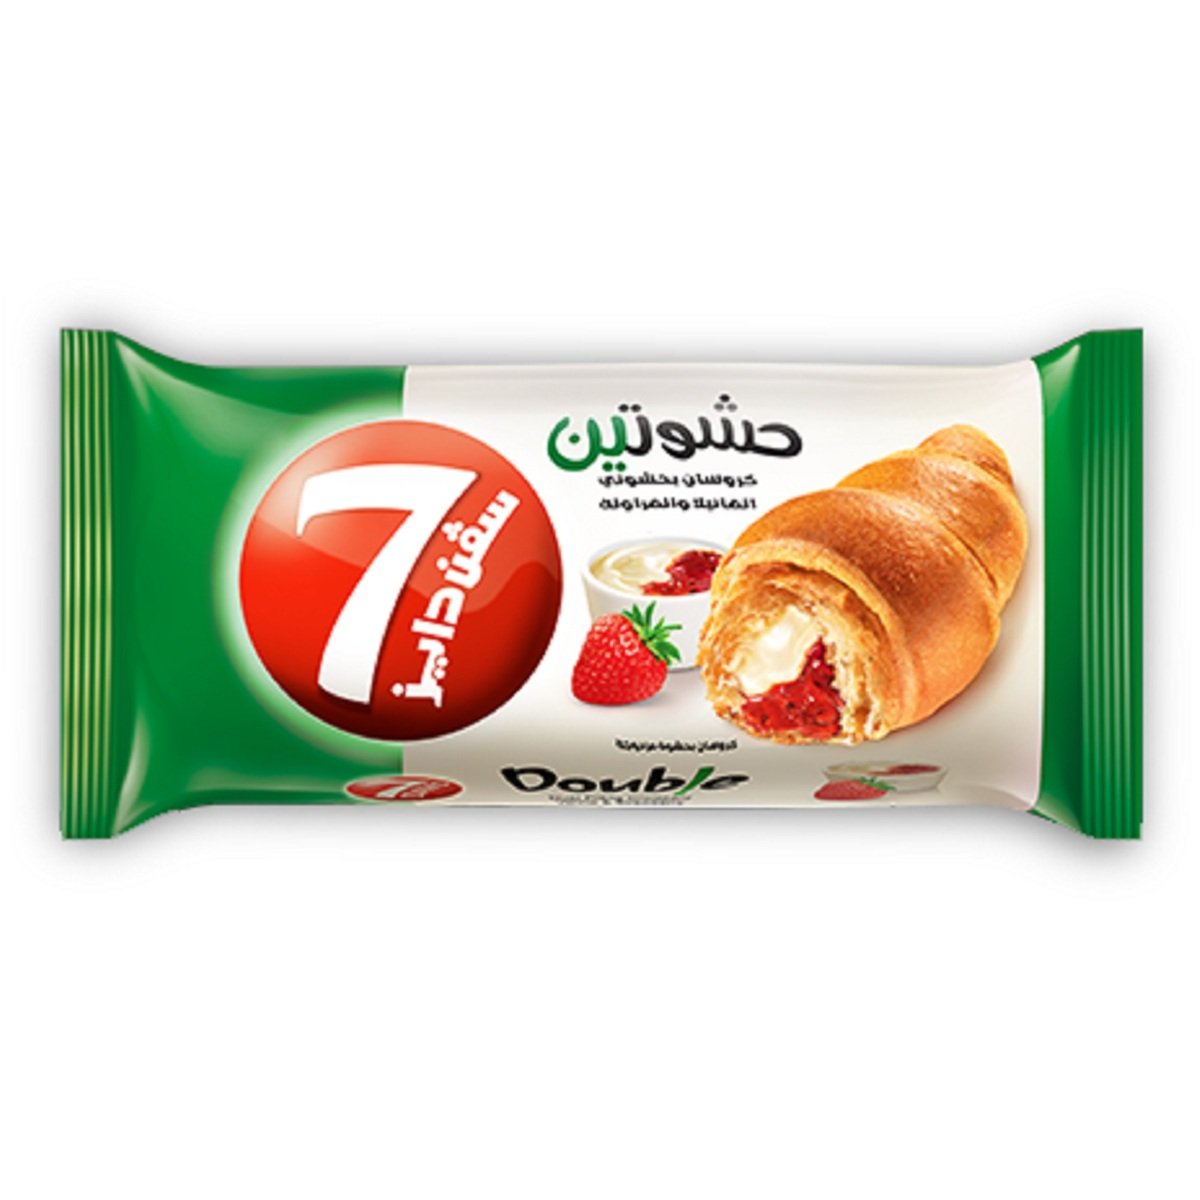 7 Days Croissant With Vanilla & Strawberry Filling 55 g